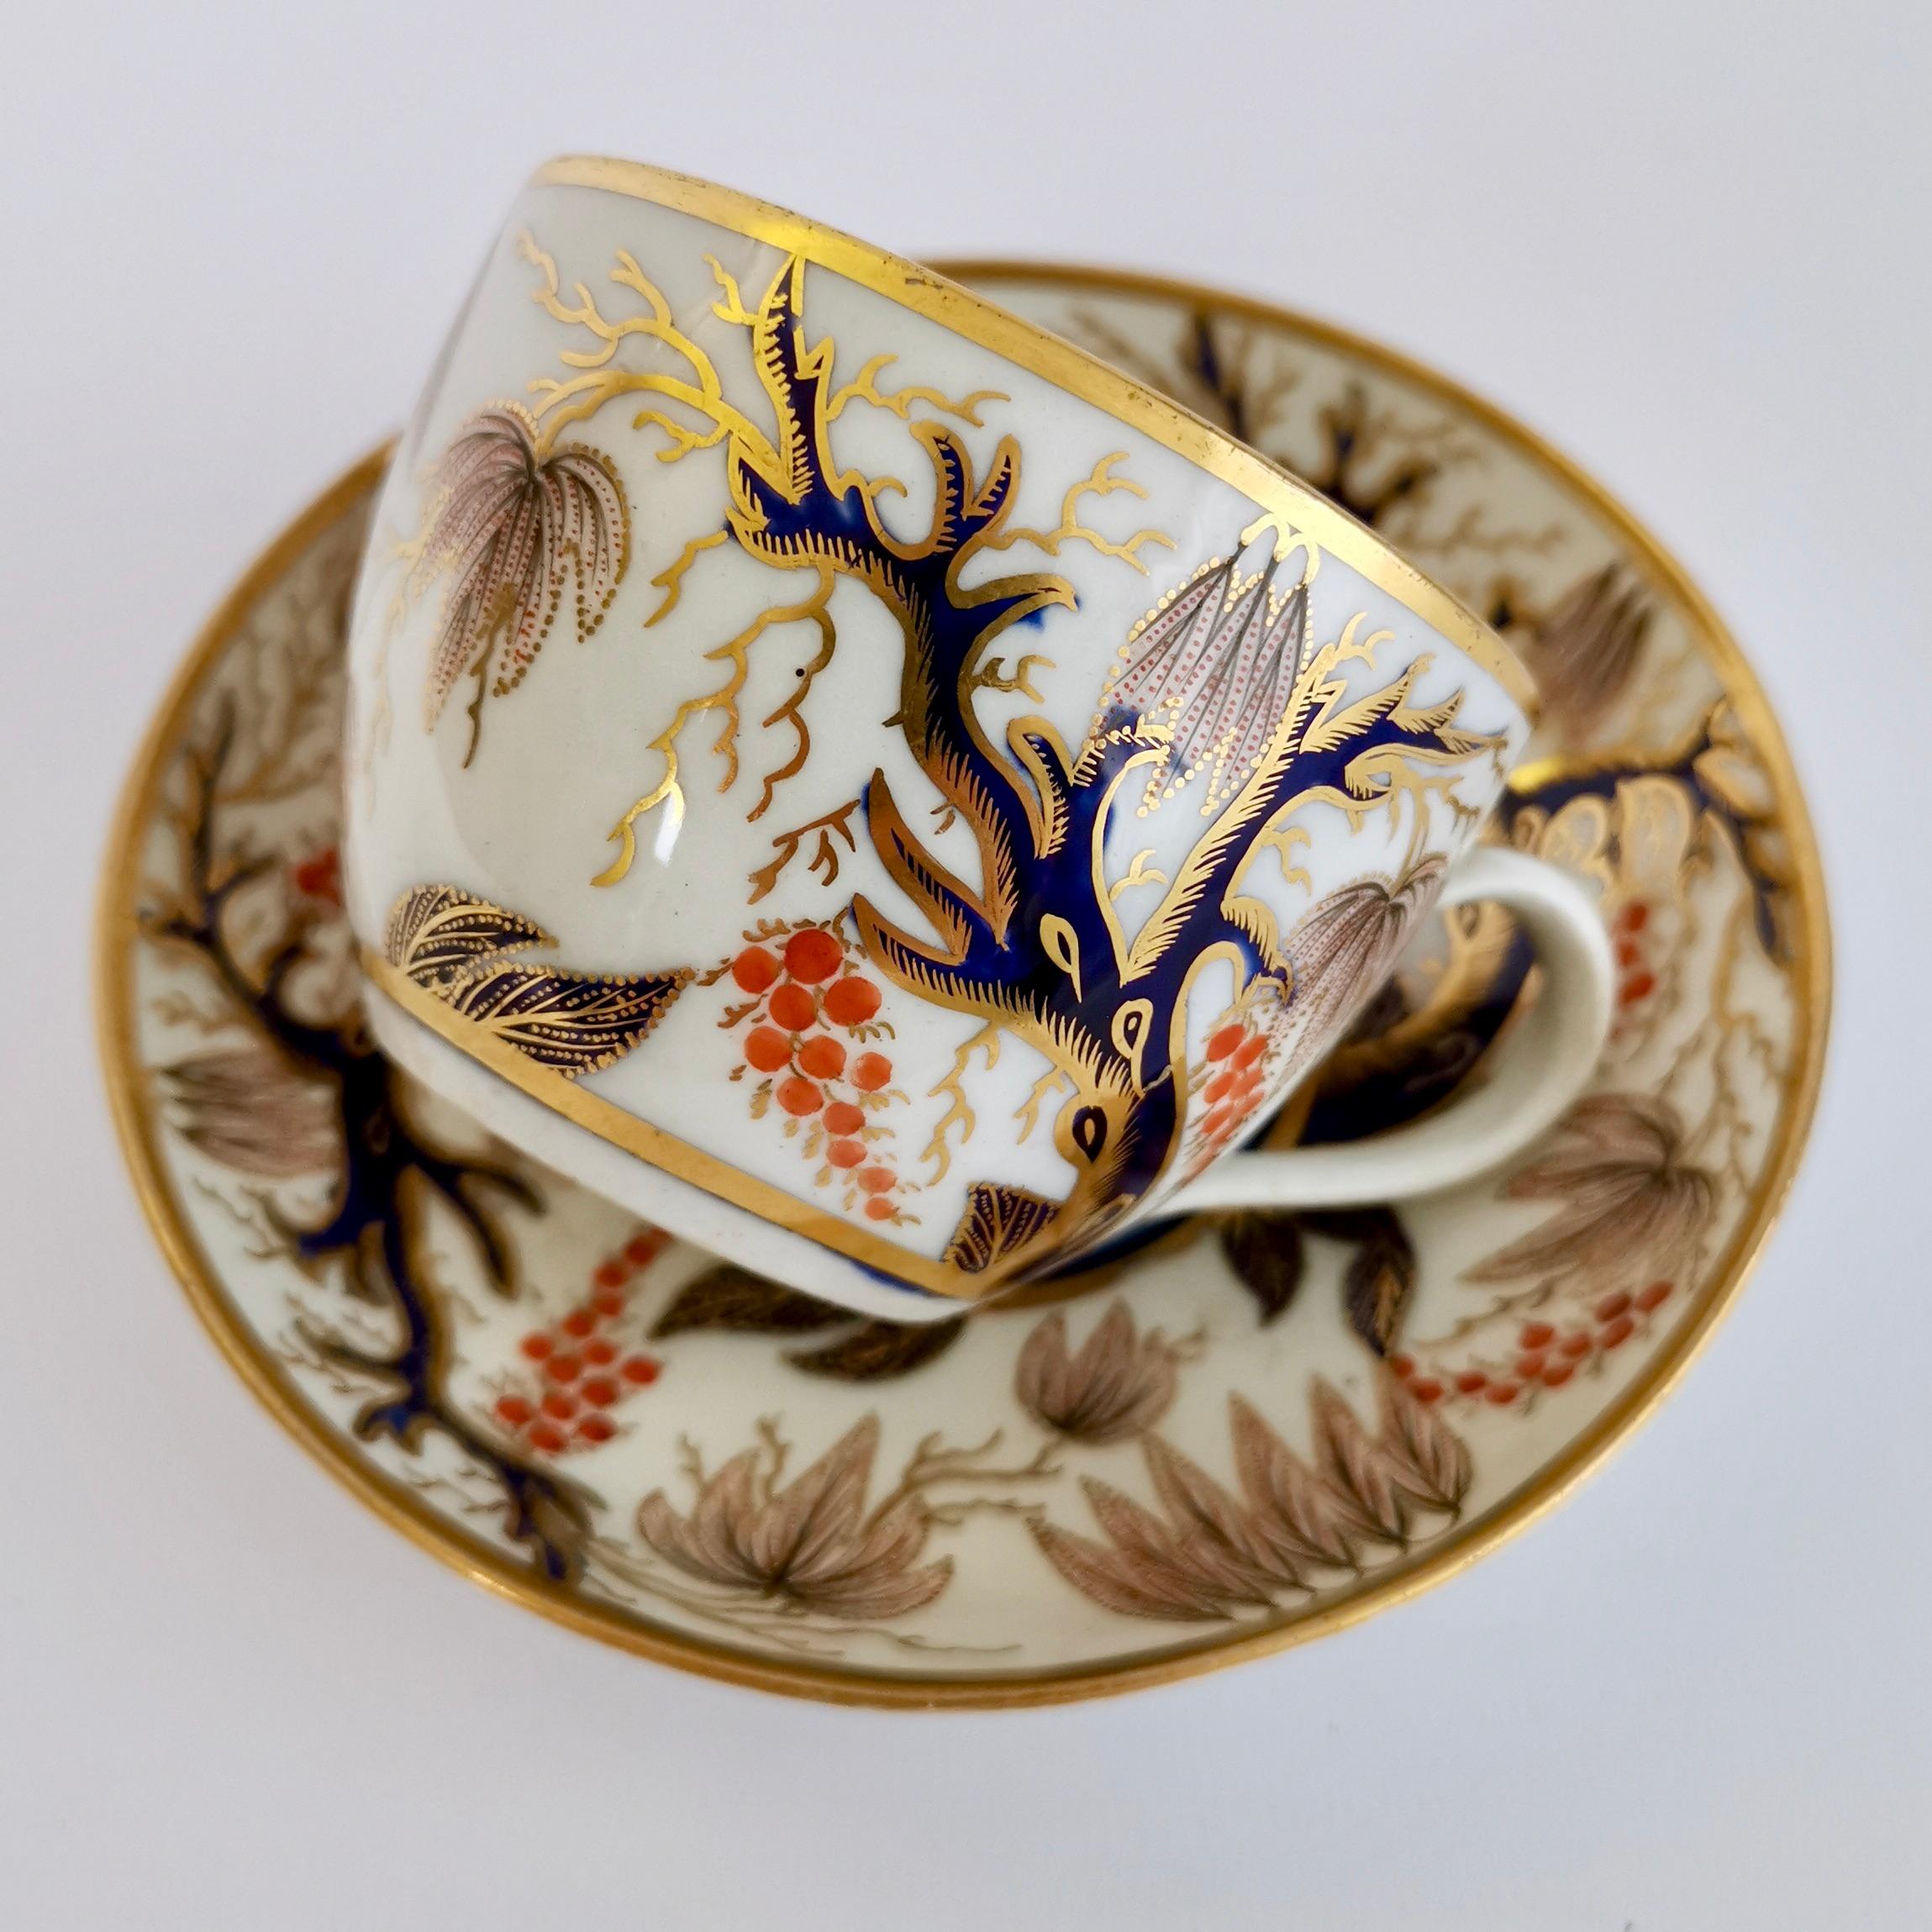 This is a beautiful true trio made by New Hall around the year 1810. It consists of a teacup, coffee cup and saucer, as you would never drink tea and coffee at the same time, why would you waste money on an extra saucer? So in the late 18th and